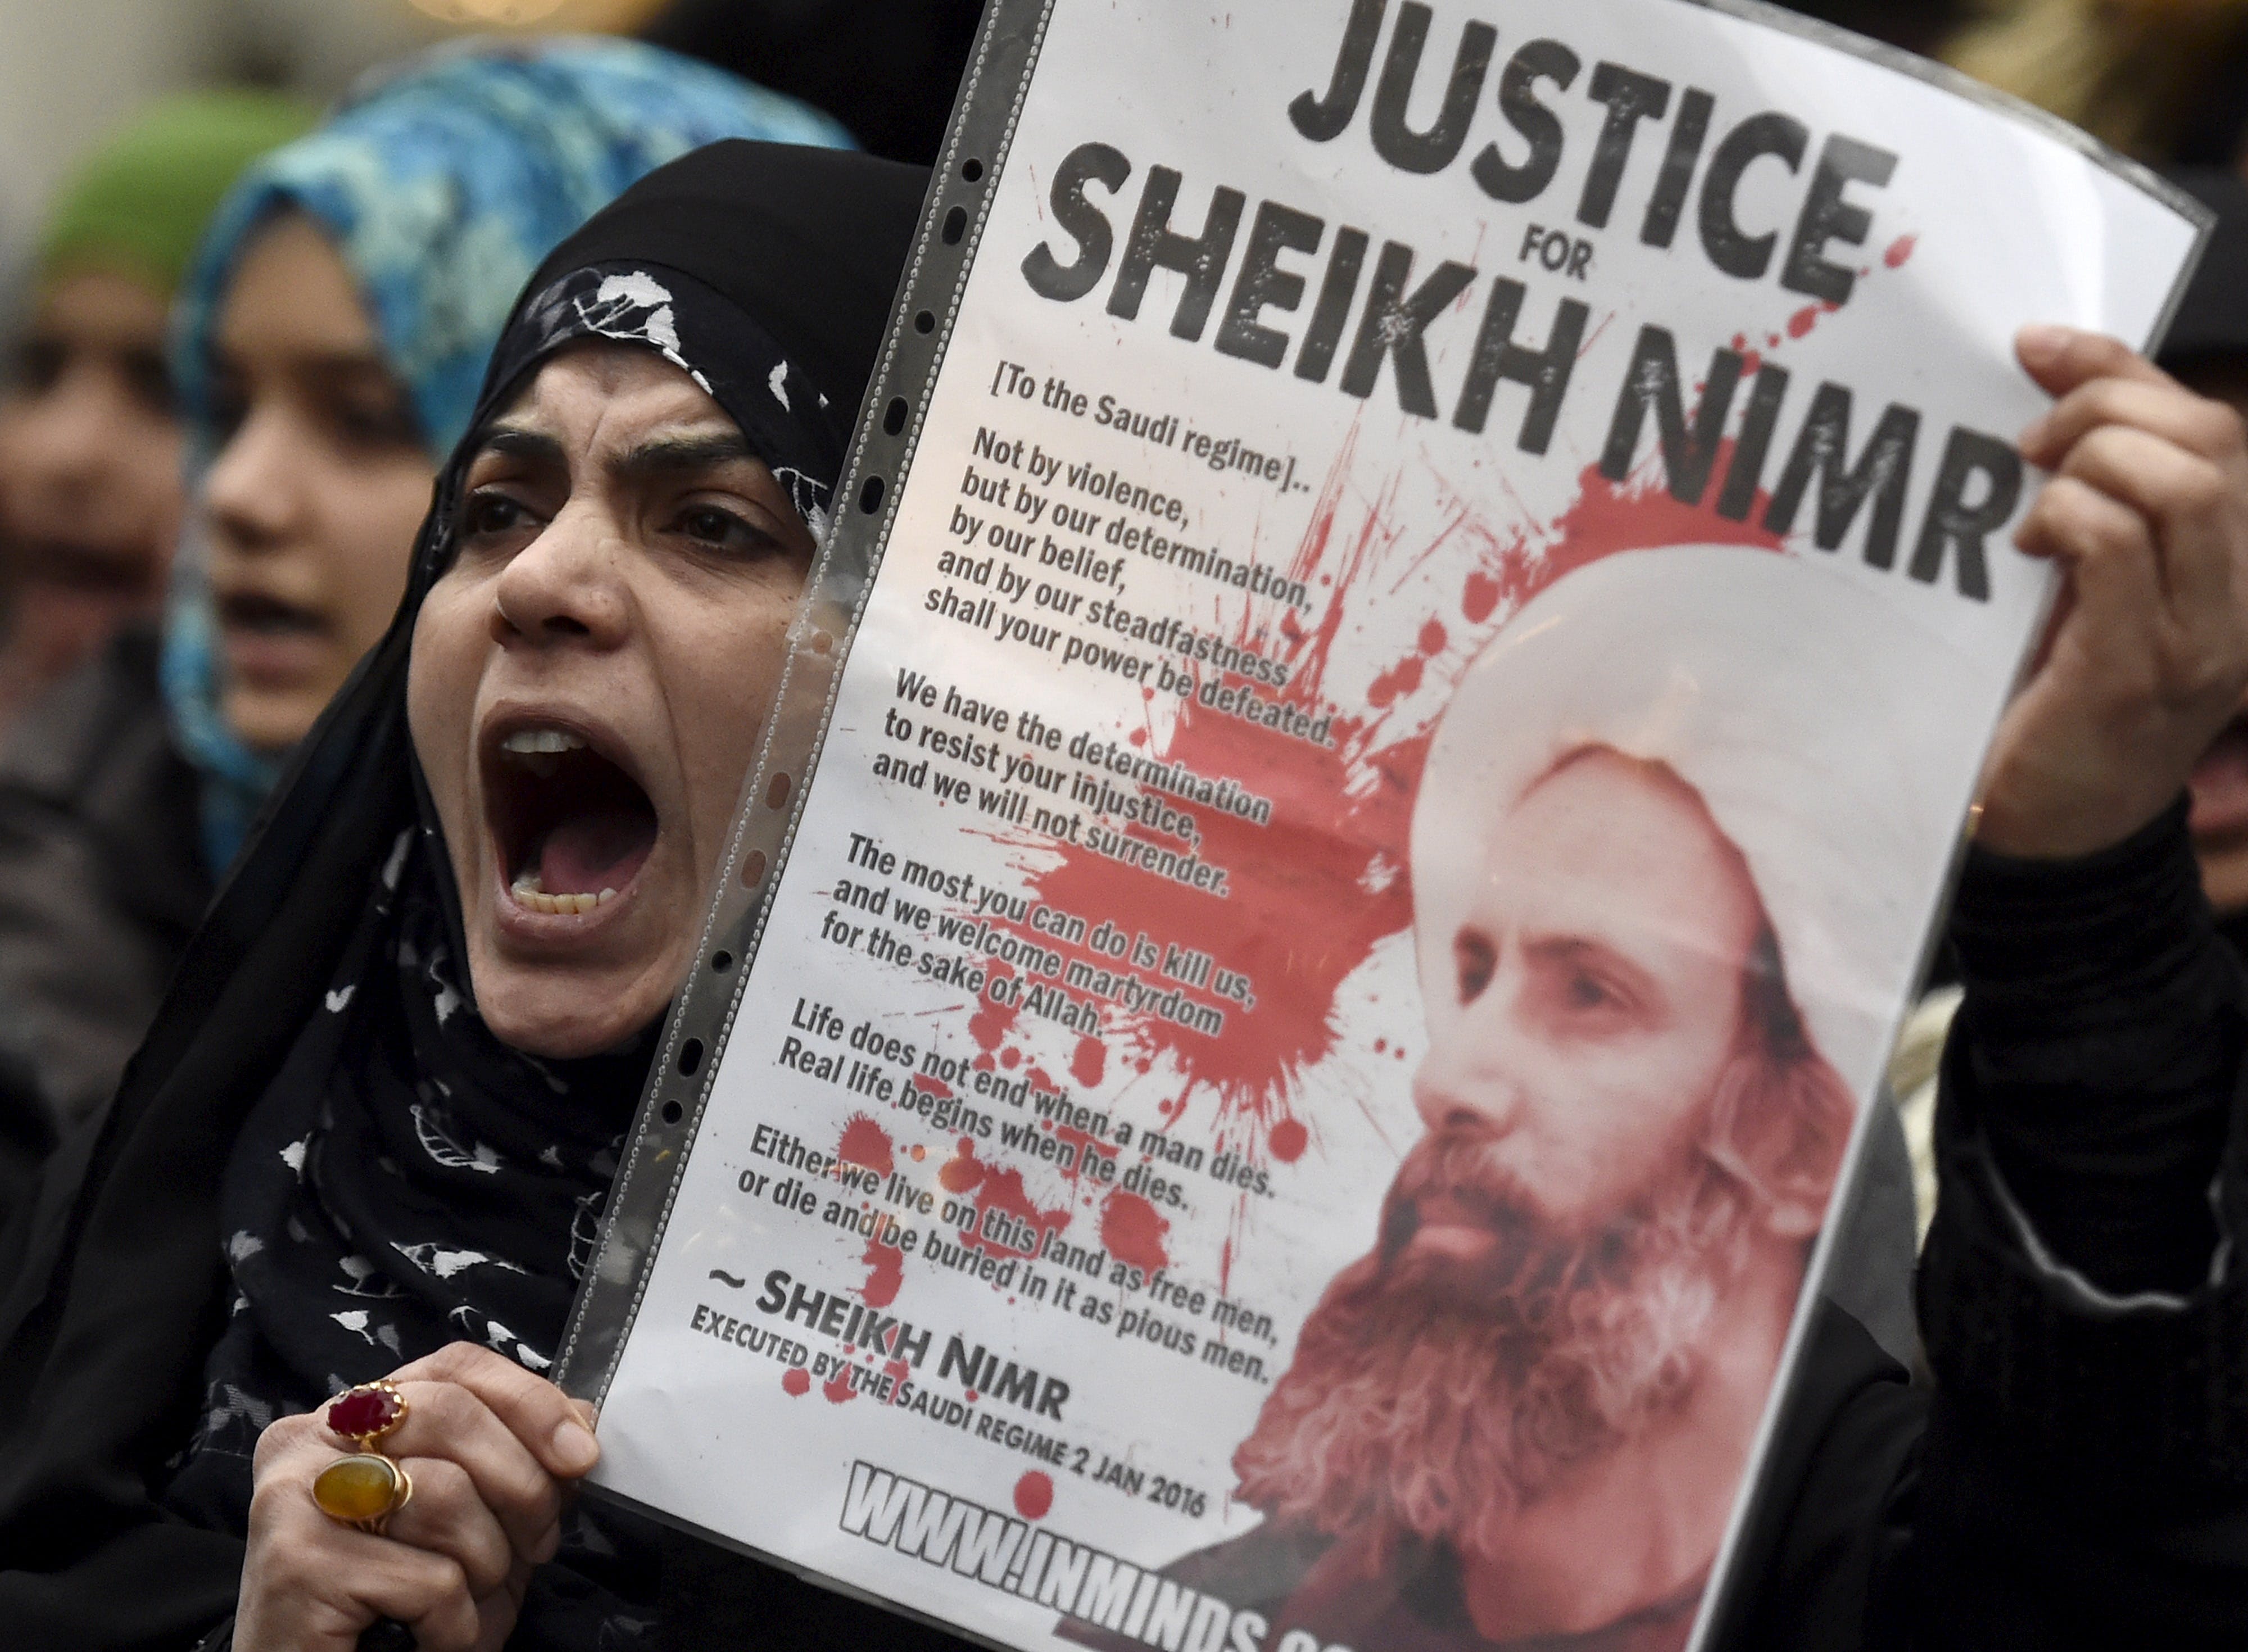 Protester holds a placard during a demonstration against the execution of Shi'ite cleric Sheikh Nimr al-Nimr in Saudi Arabia, outside the Saudi Arabian Embassy in London, Britain